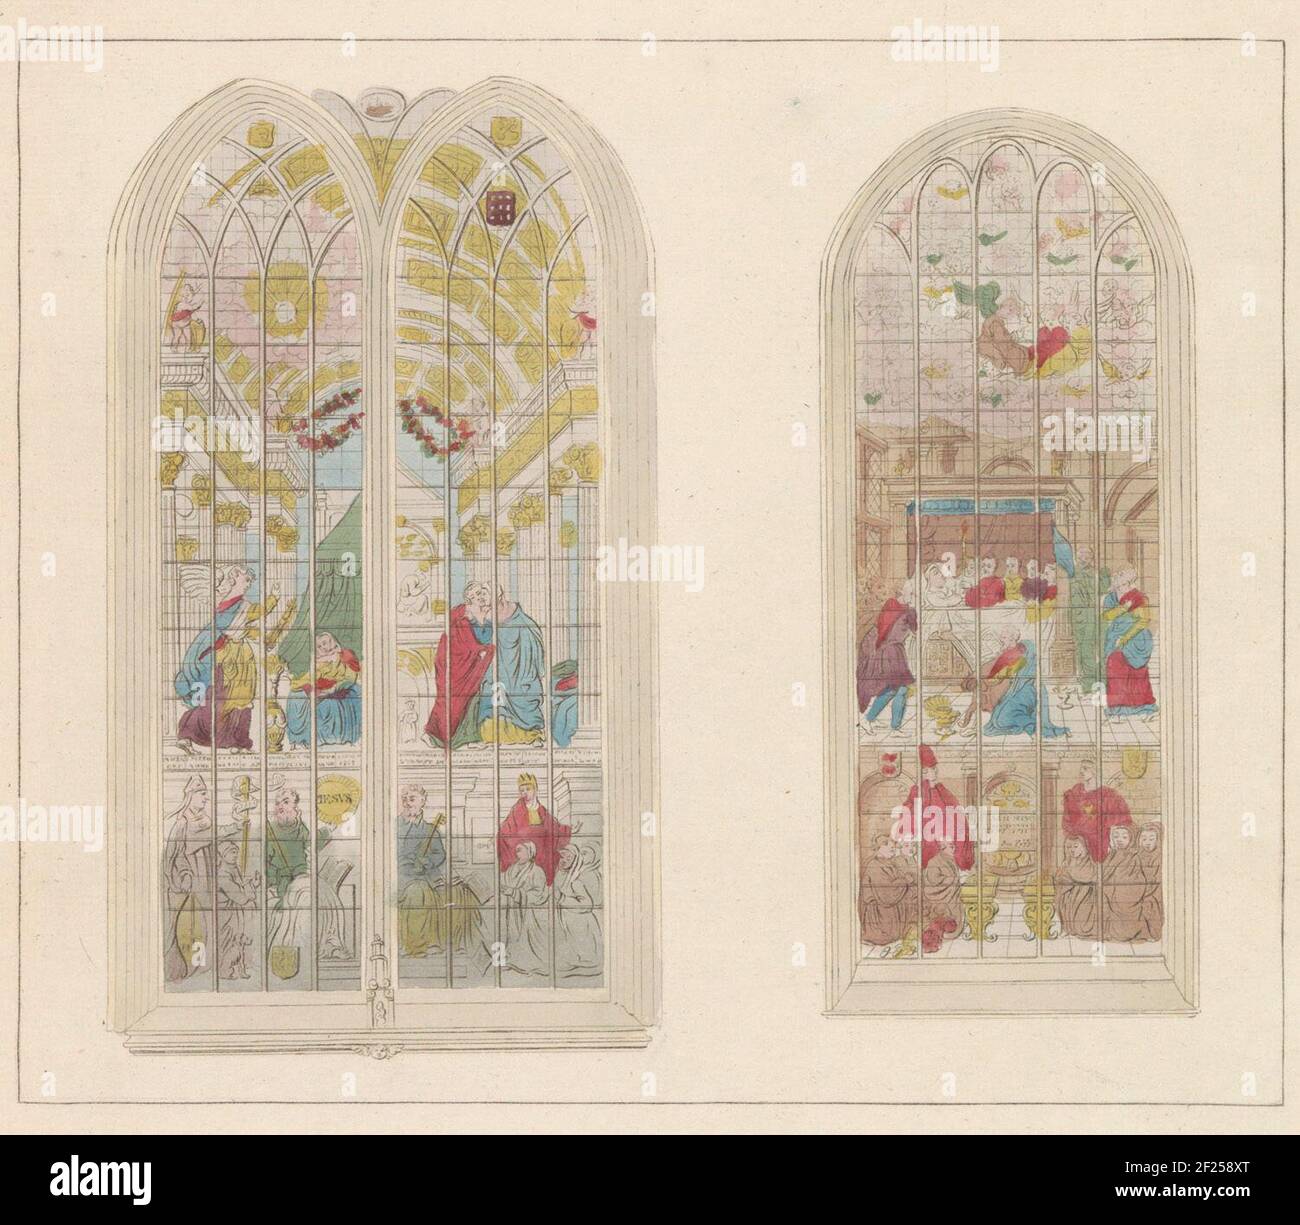 Glasramen in de Oude Kerk te Amsterdam, 1810-1825; Représentation des fameuses Vitres peintes de l'Eglise vieille.Three stained glass windows in the Oude Kerk in Amsterdam, ca. 1810-1825. Part of a sheet metal from approx. 1824-1825 with 74 (unnumbered) plates of the most important topographical faces and several morals and habits in the United Kingdom of the Netherlands. Stock Photo